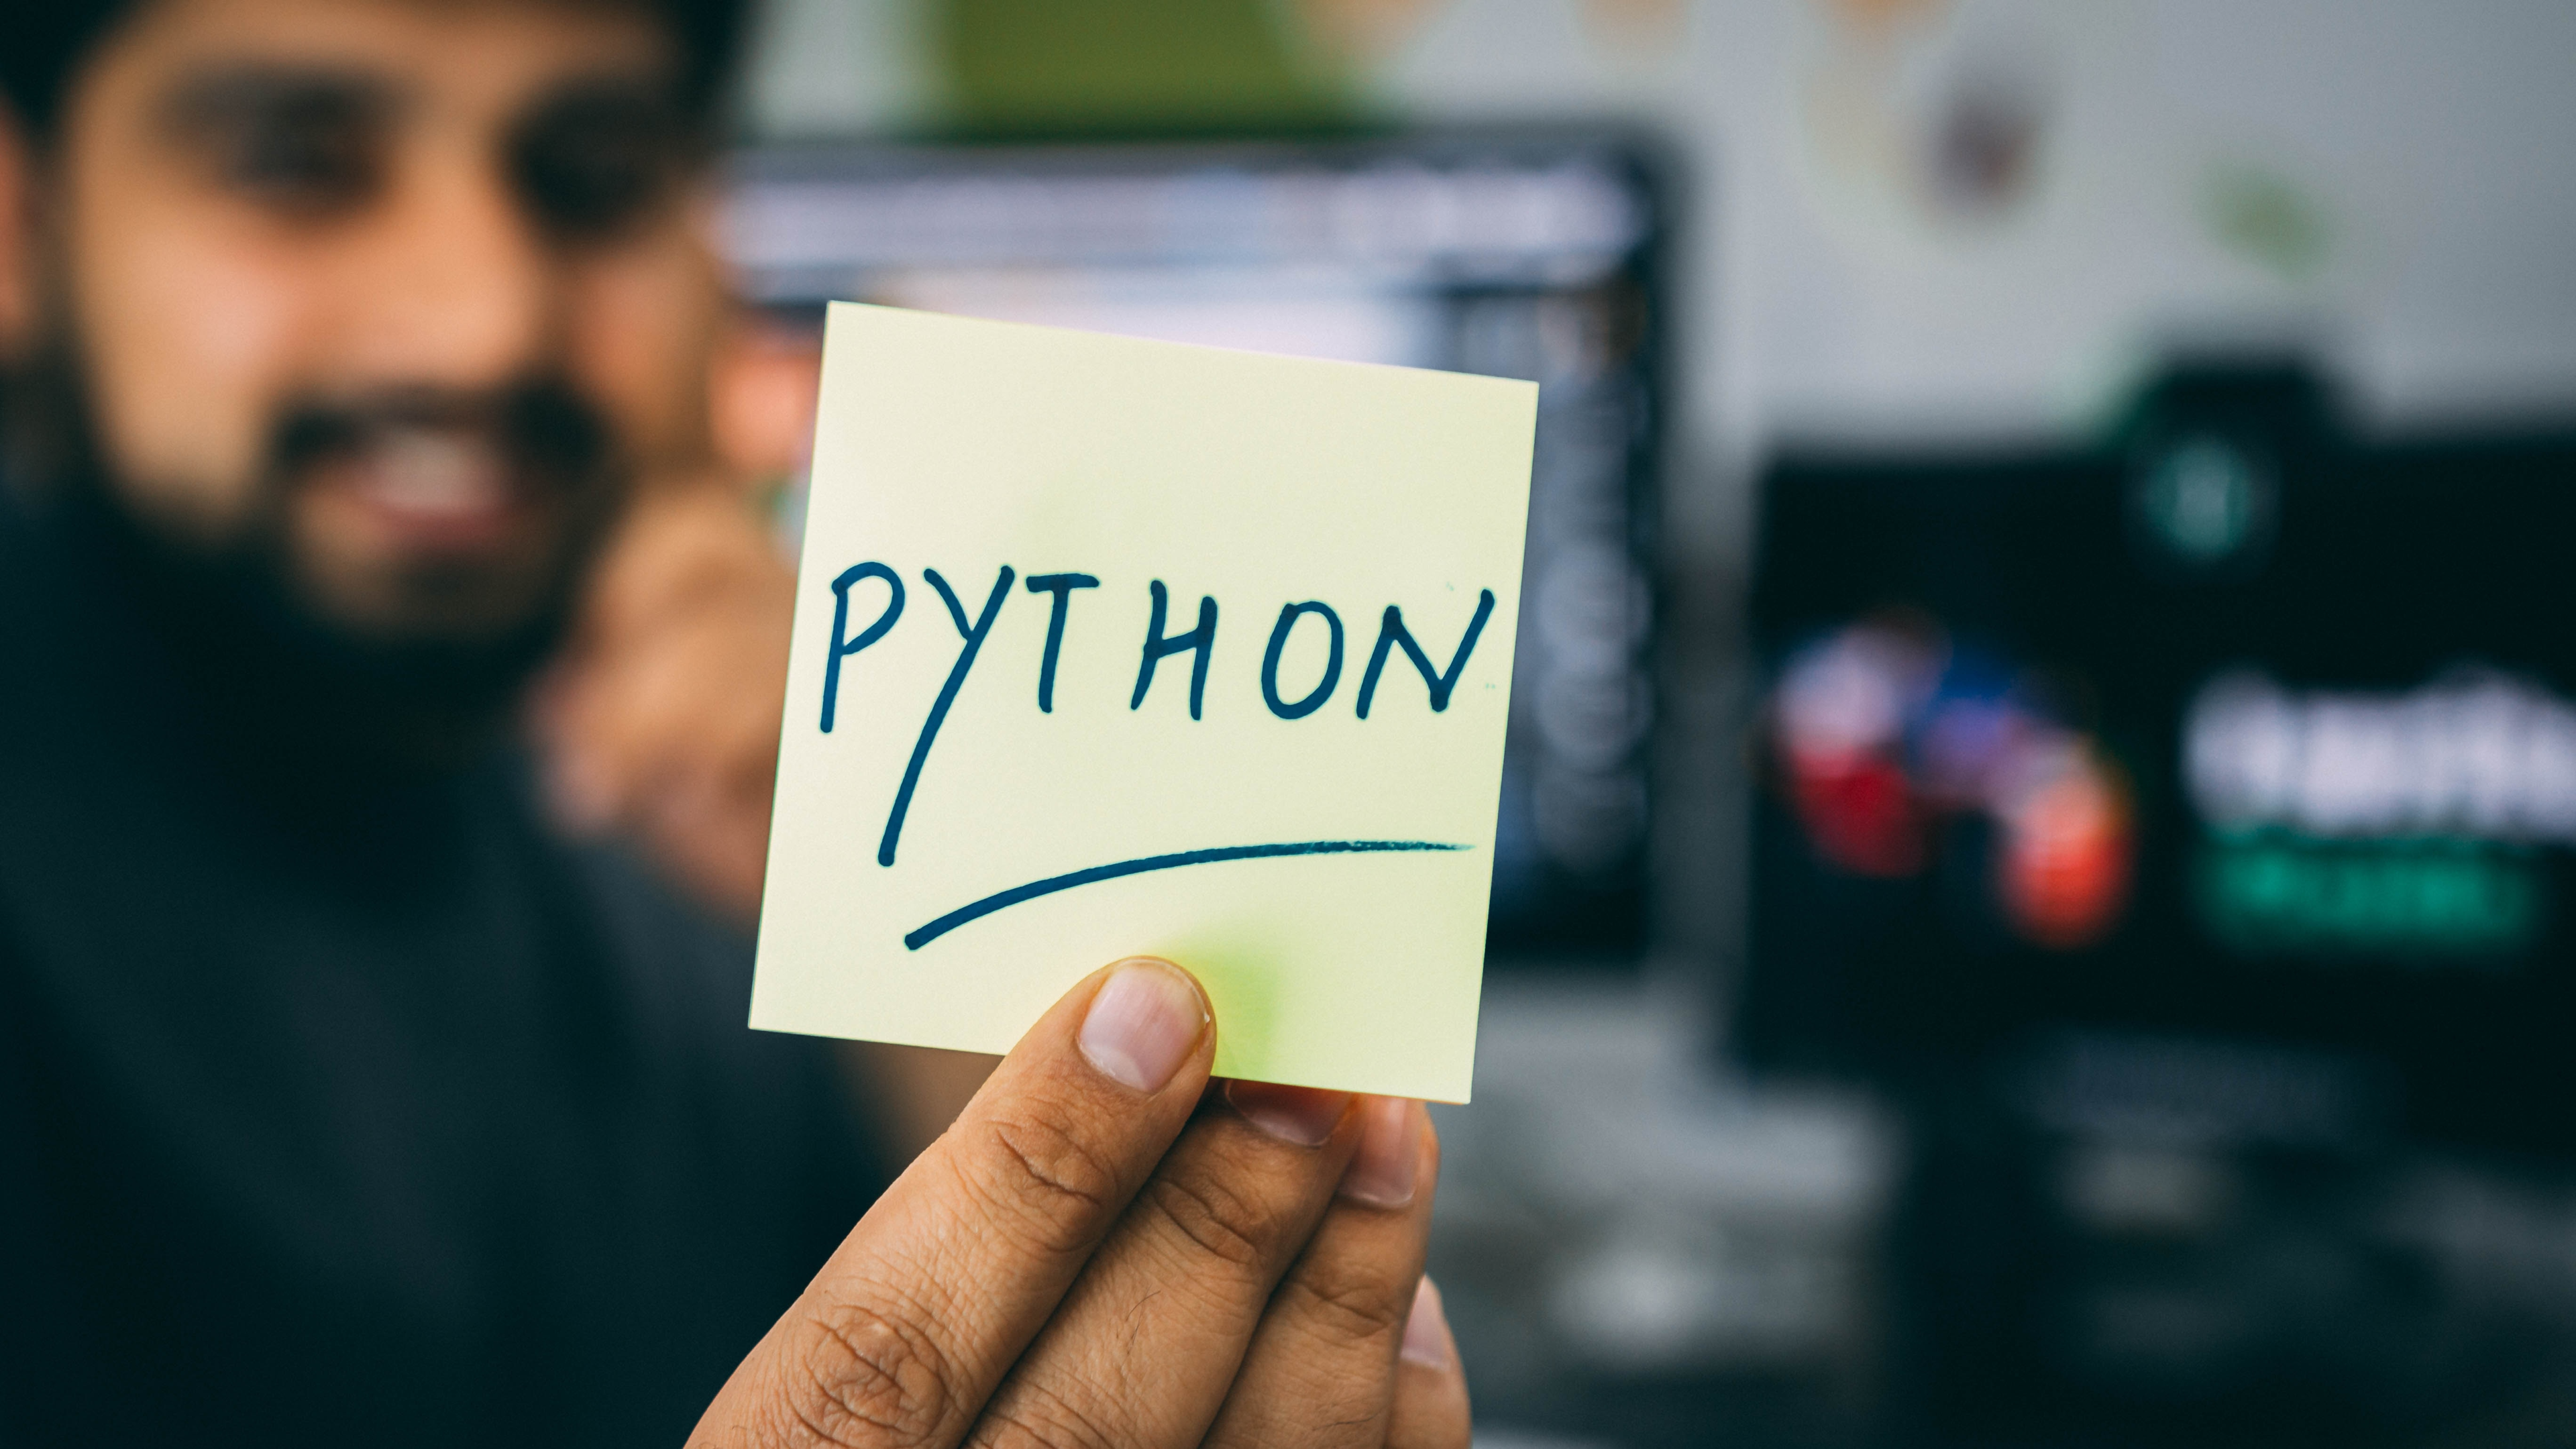 How to Get the Length of a String in Python